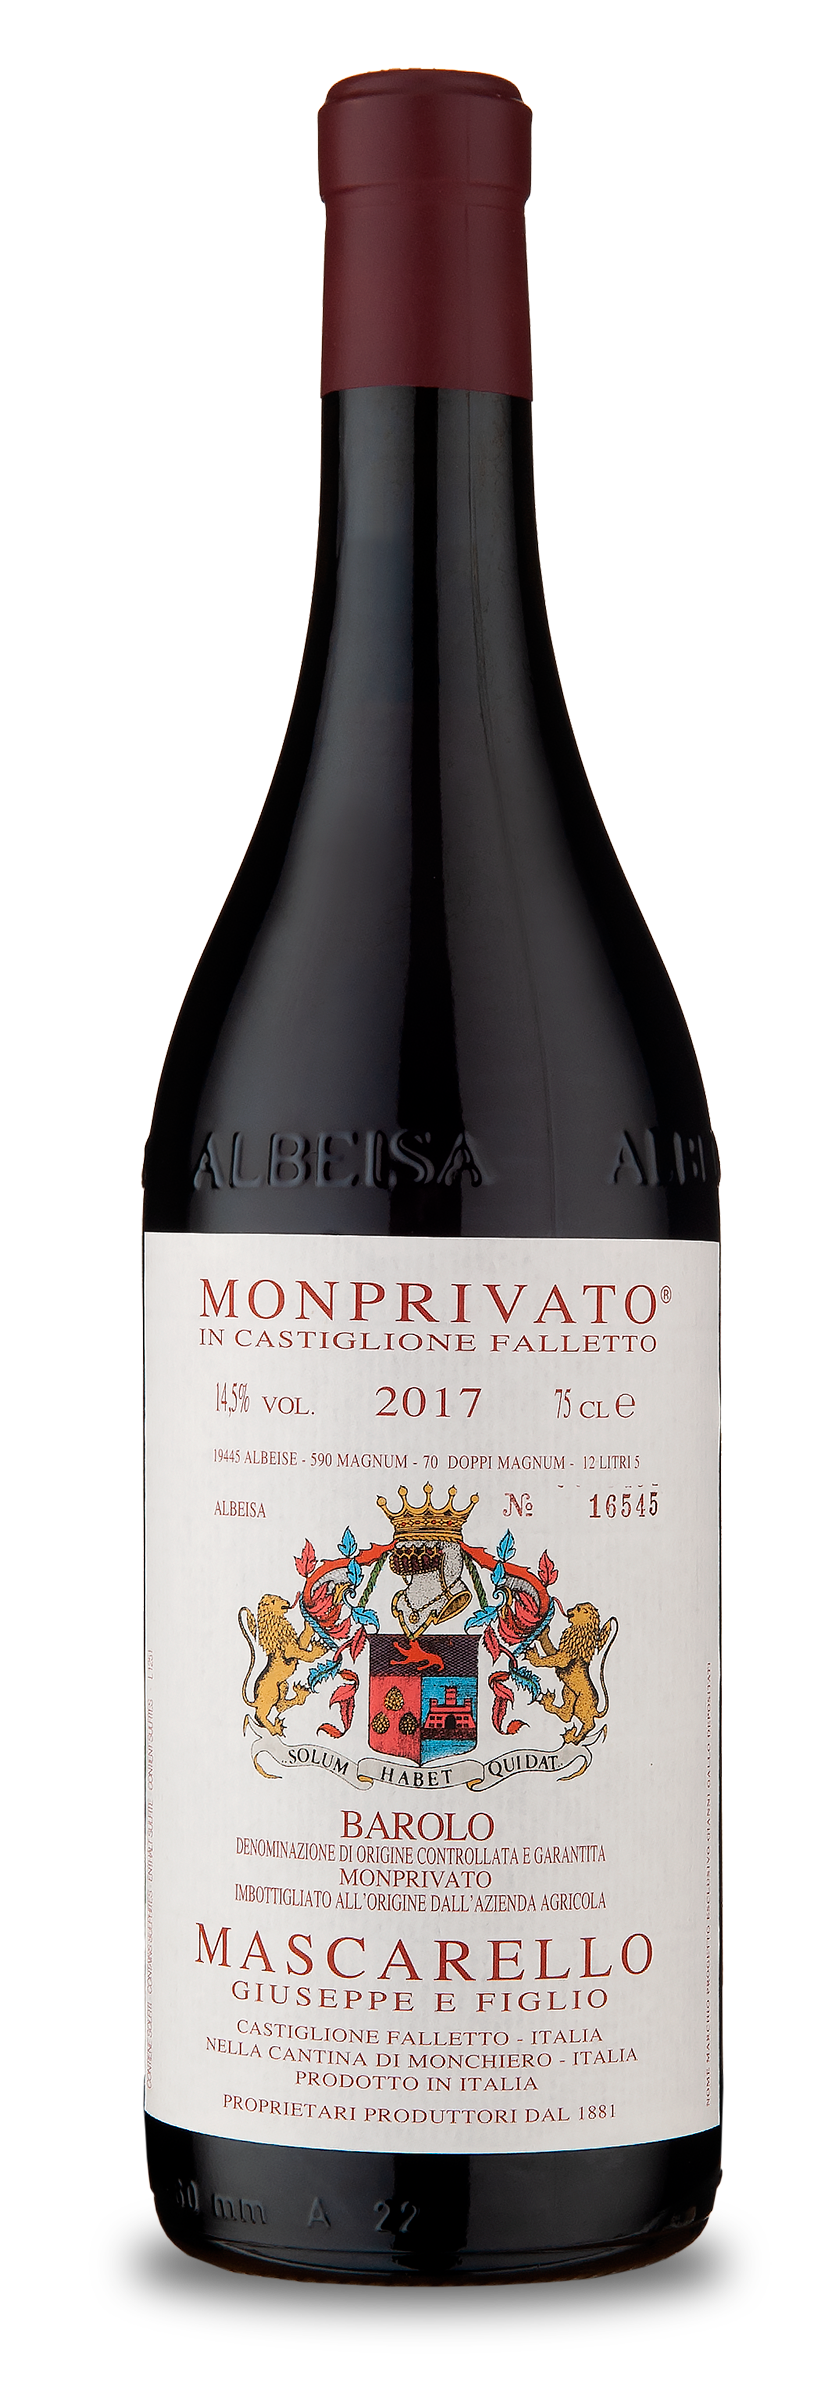 Barolo Monprivato 2017 - ONLY ON PRE-ALLOCATION Contact us for further information (indulge@flemmings.wine)